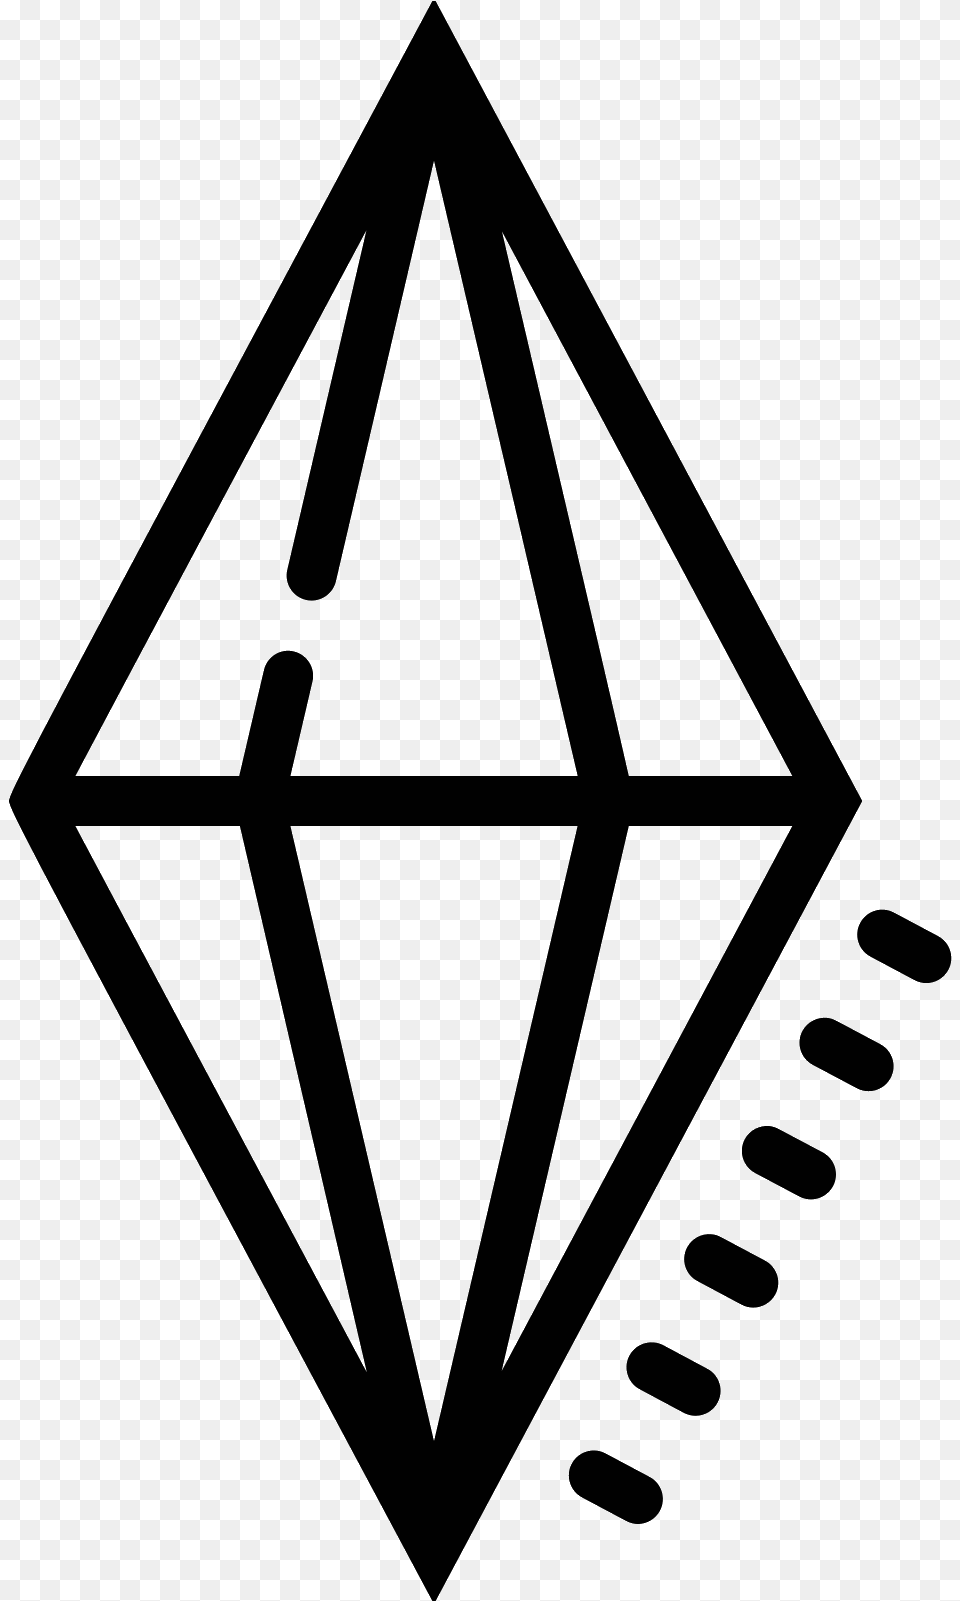 The Sims Icon Download And Vector Sims Icon Plumbob, Gray Png